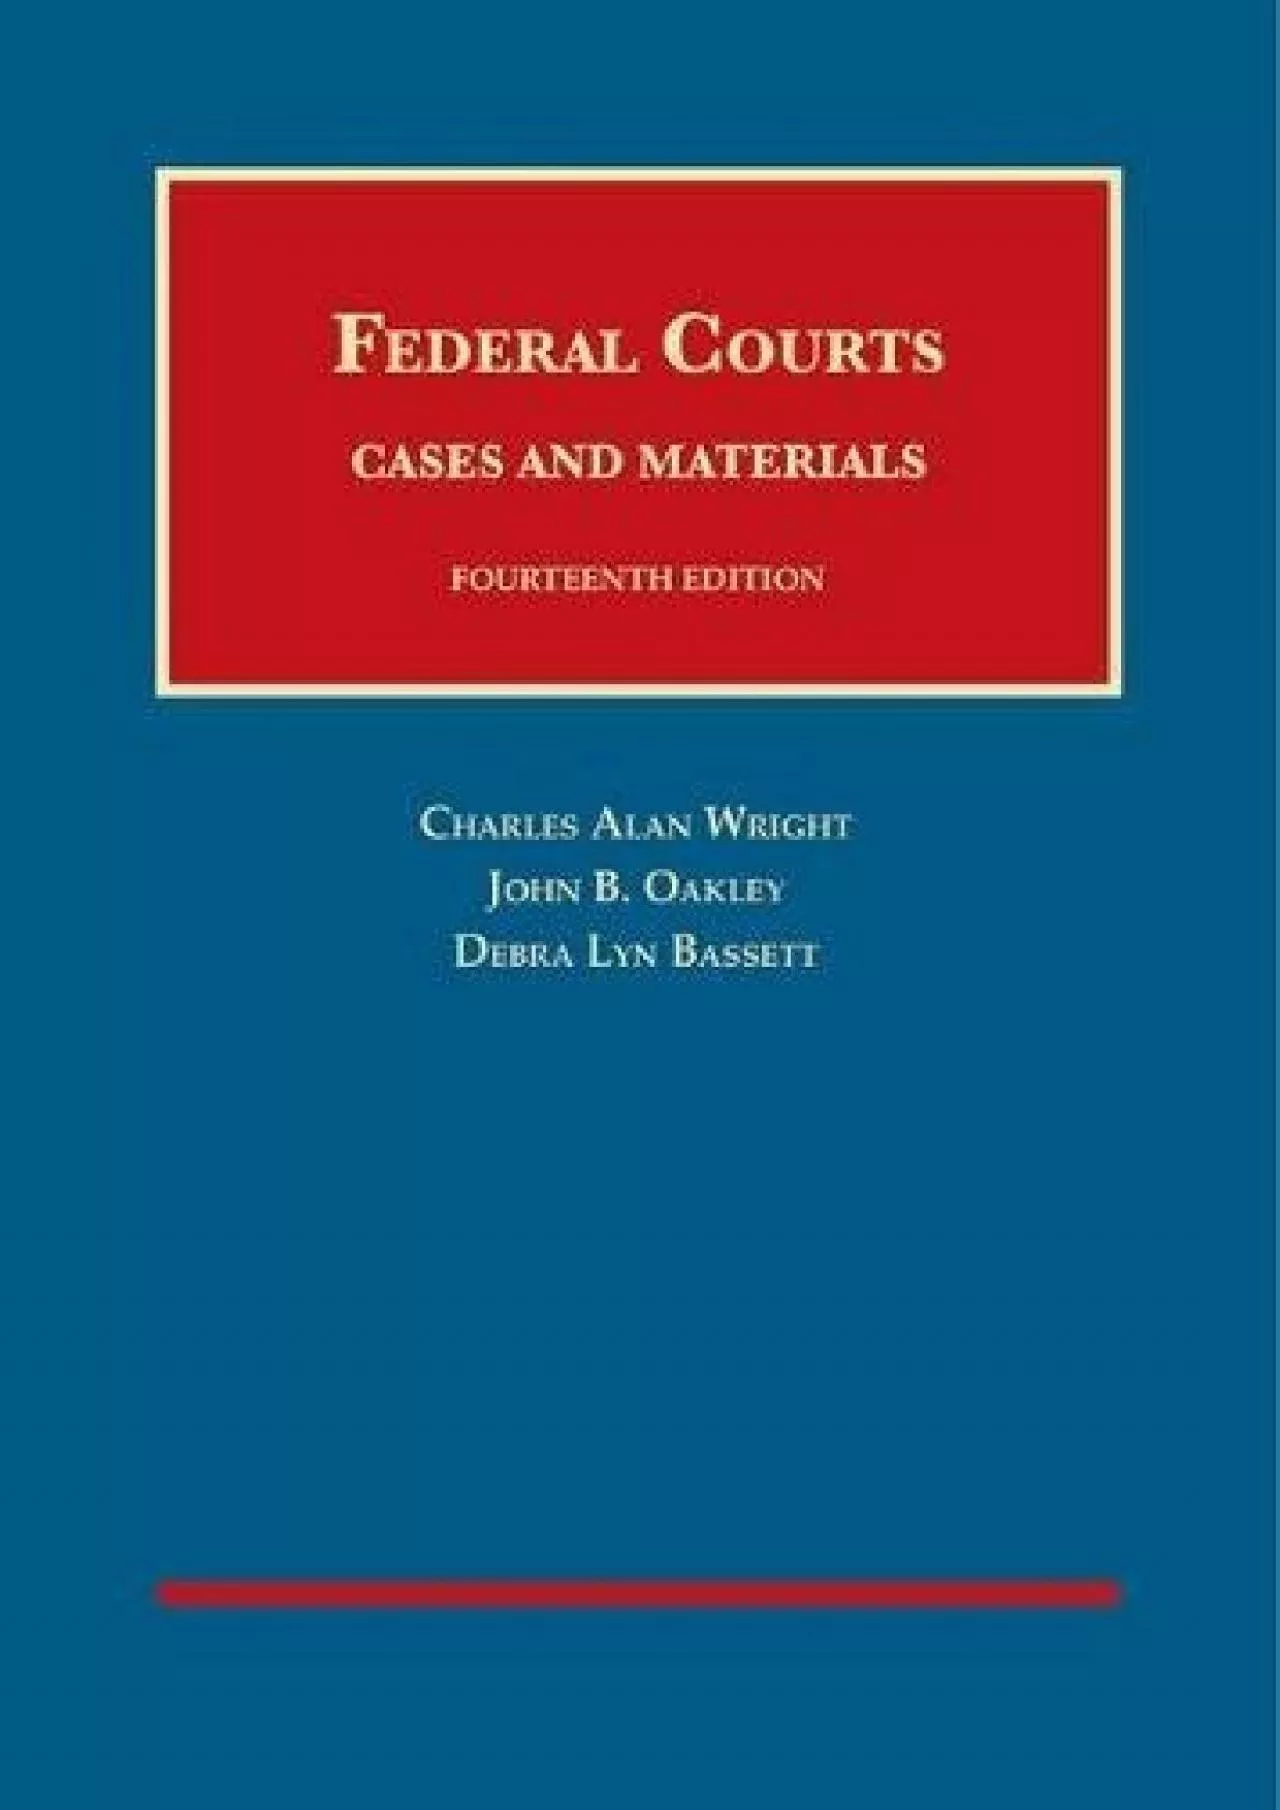 Download Book [PDF] Federal Courts: Cases and Materials (University Casebook Series)